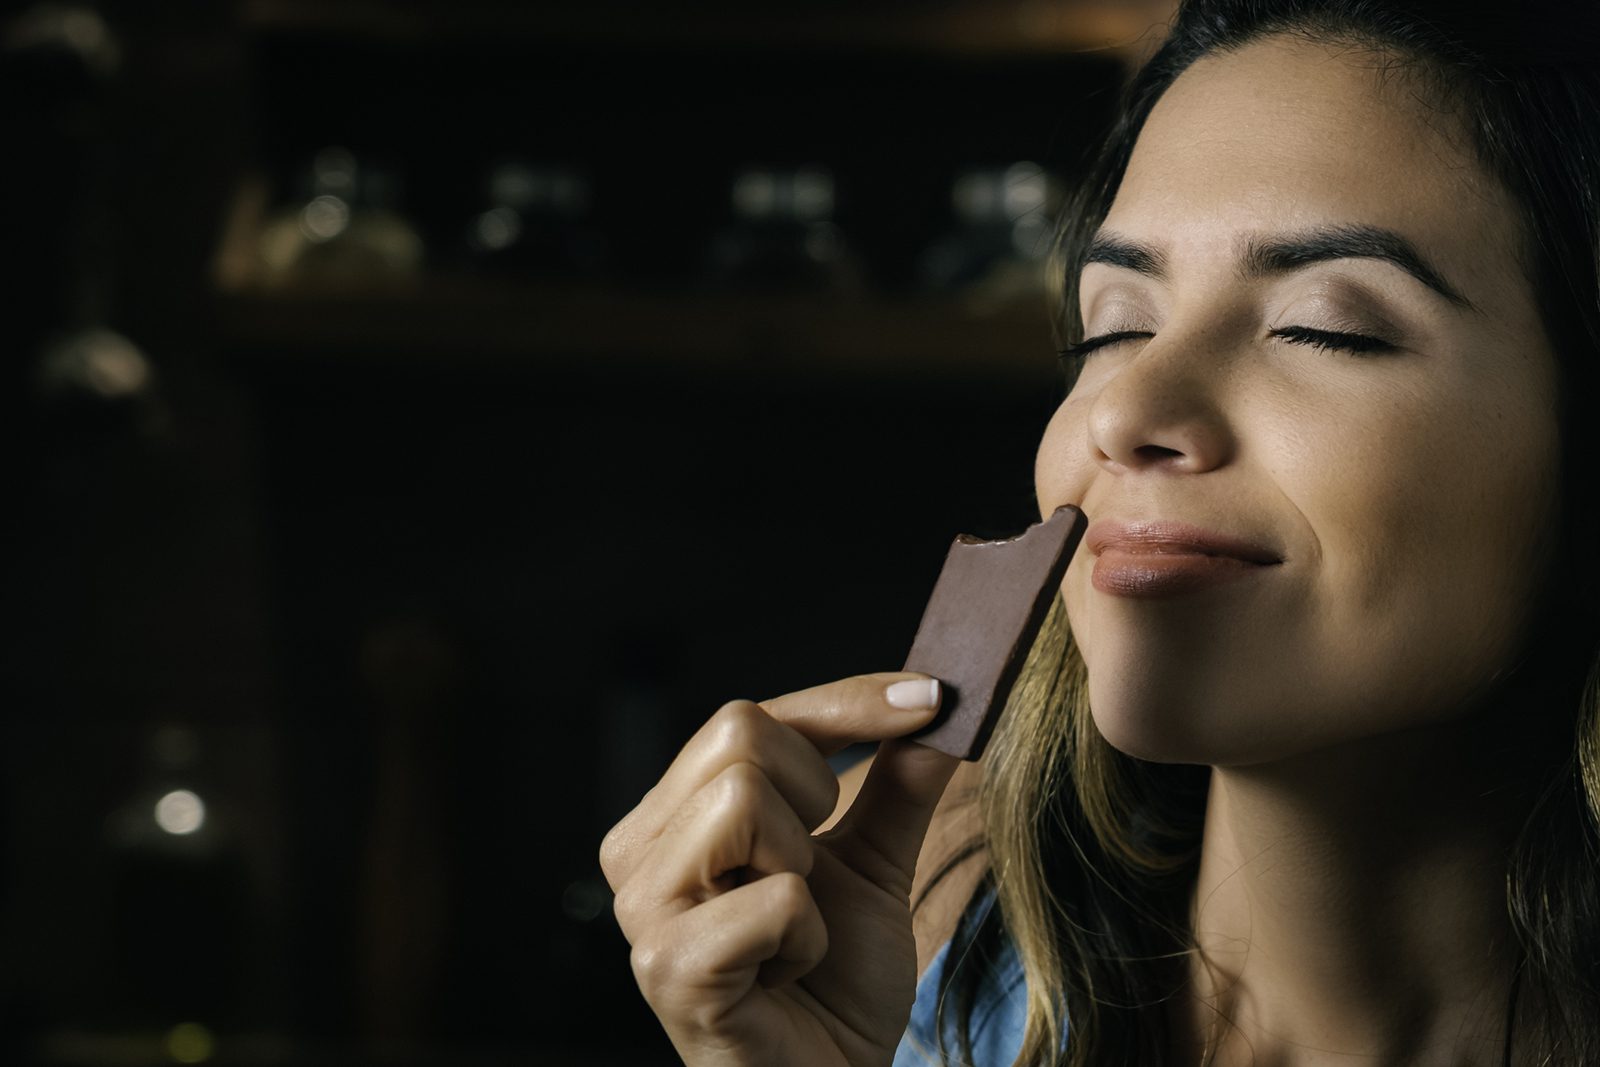 A woman holds up a piece of dark brown chocolate to her nose. Her eyes are closed and she has a smile on her face as she smells it.